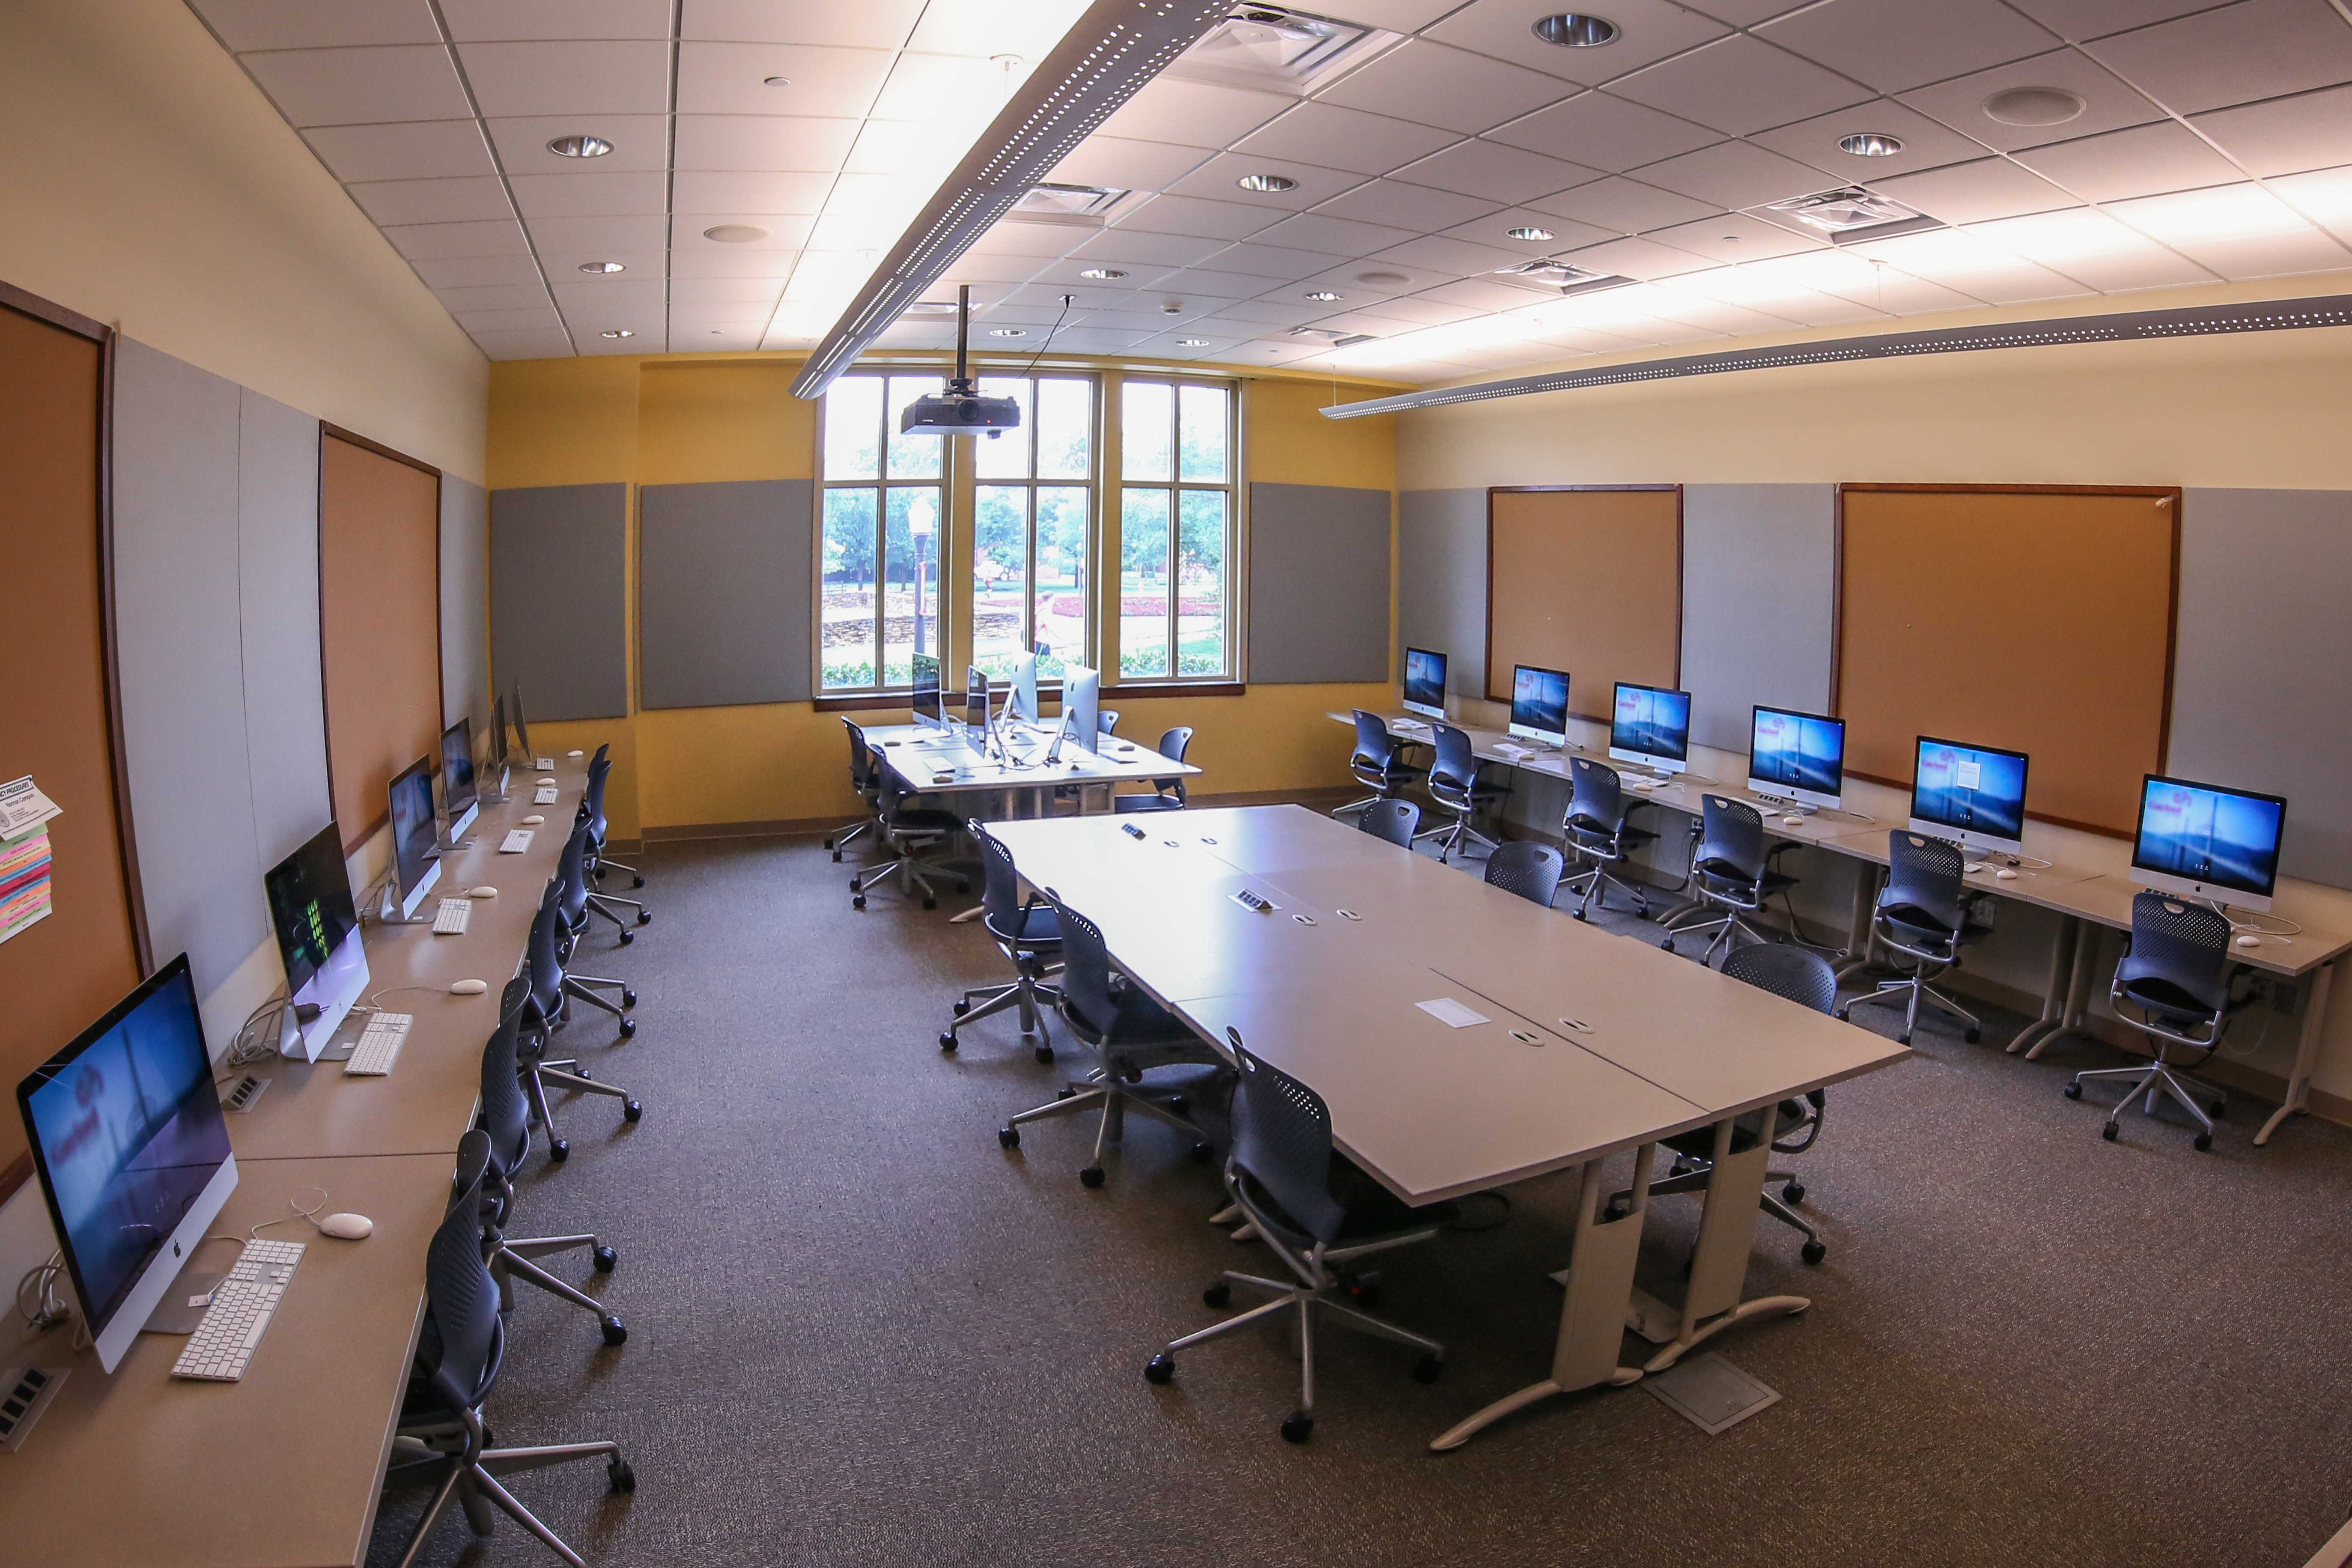 Computer Lab at Gaylord Hall with lots of seating and computers.